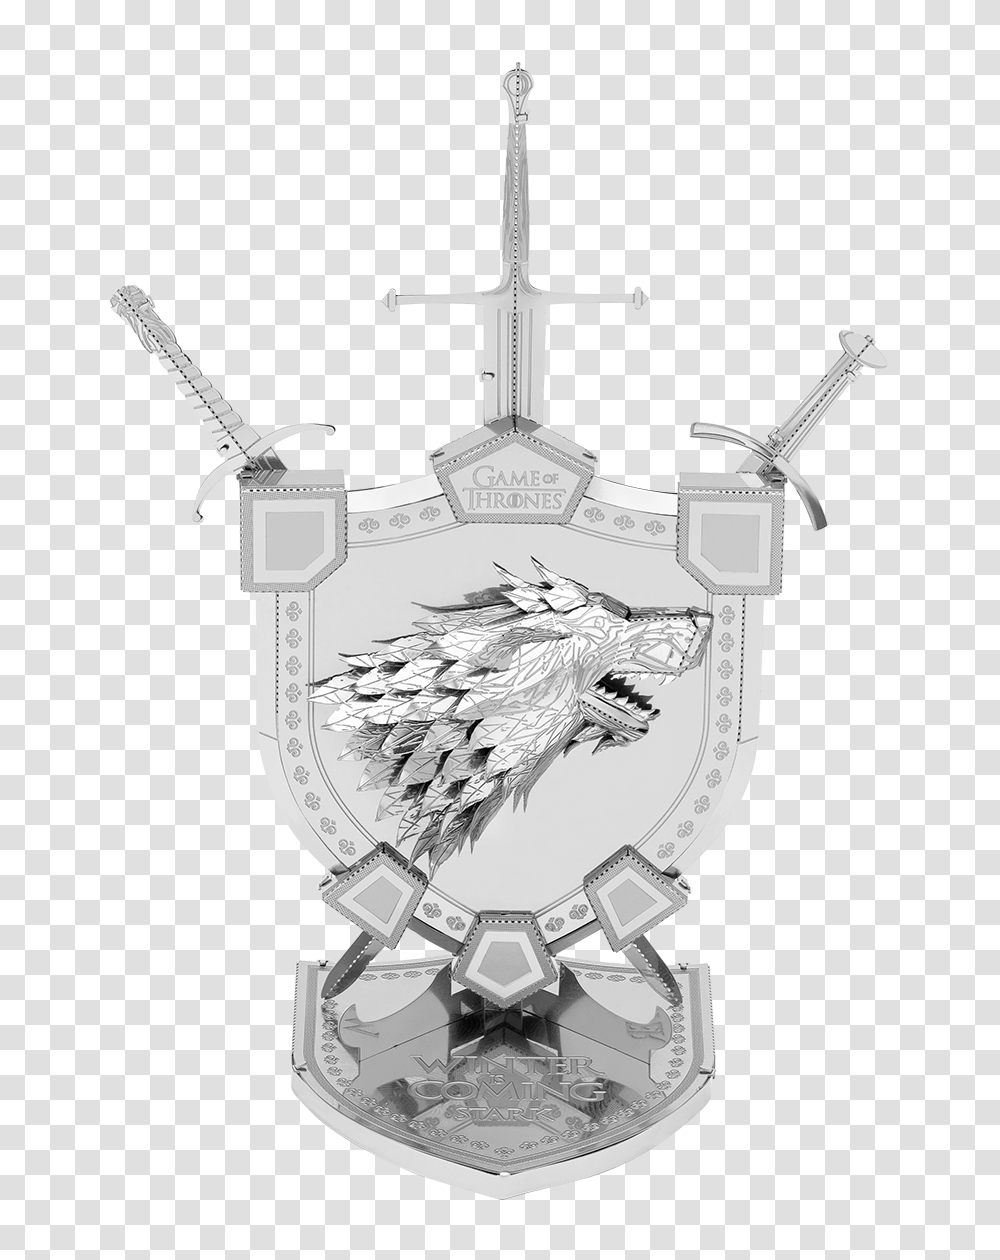 Fascinations Metal Earth 3d Model Diy Kits House Game Of Thrones Pictures House Stark, Armor, Shield, Cross, Symbol Transparent Png